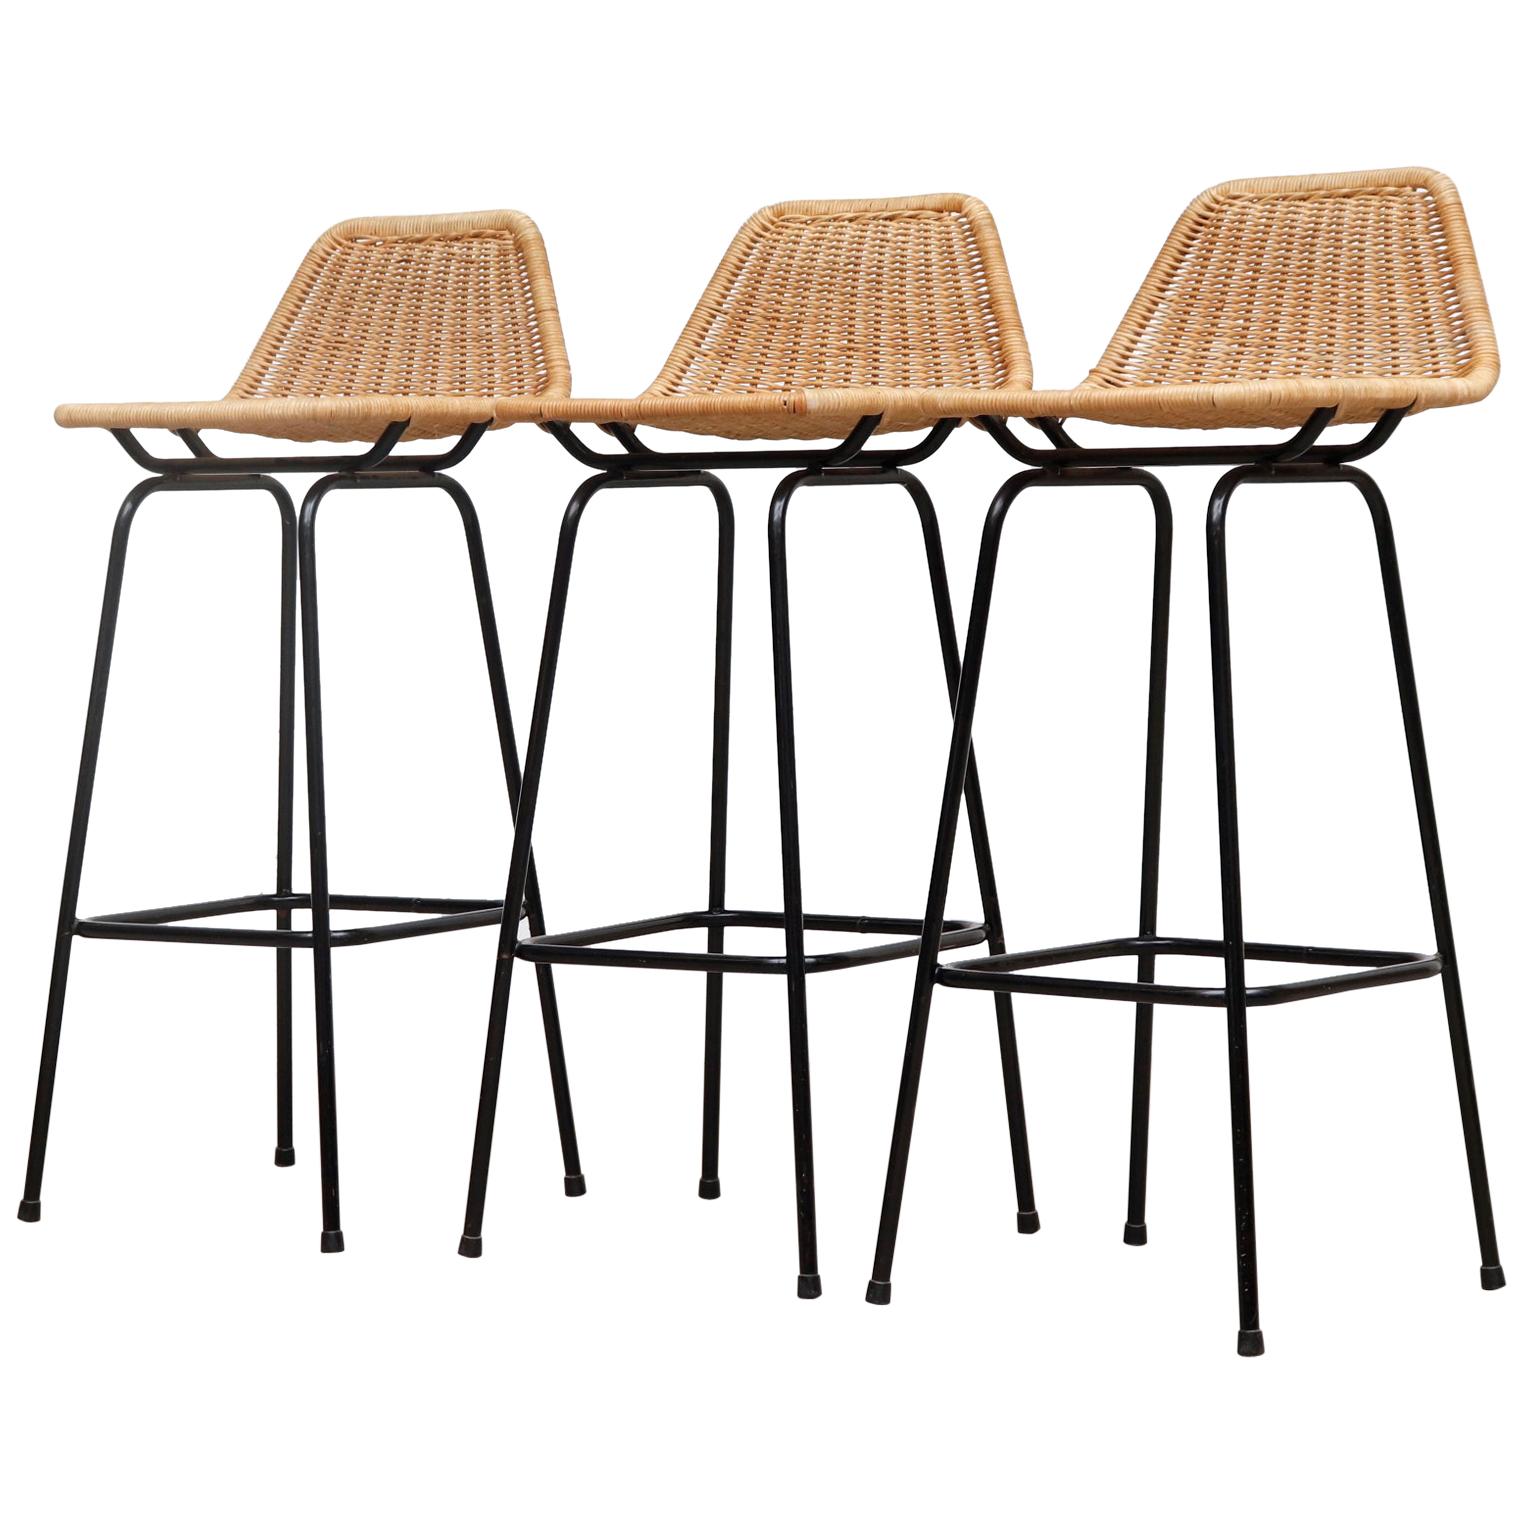 Set of Charlotte Perriand Style Wicker Bar Stools